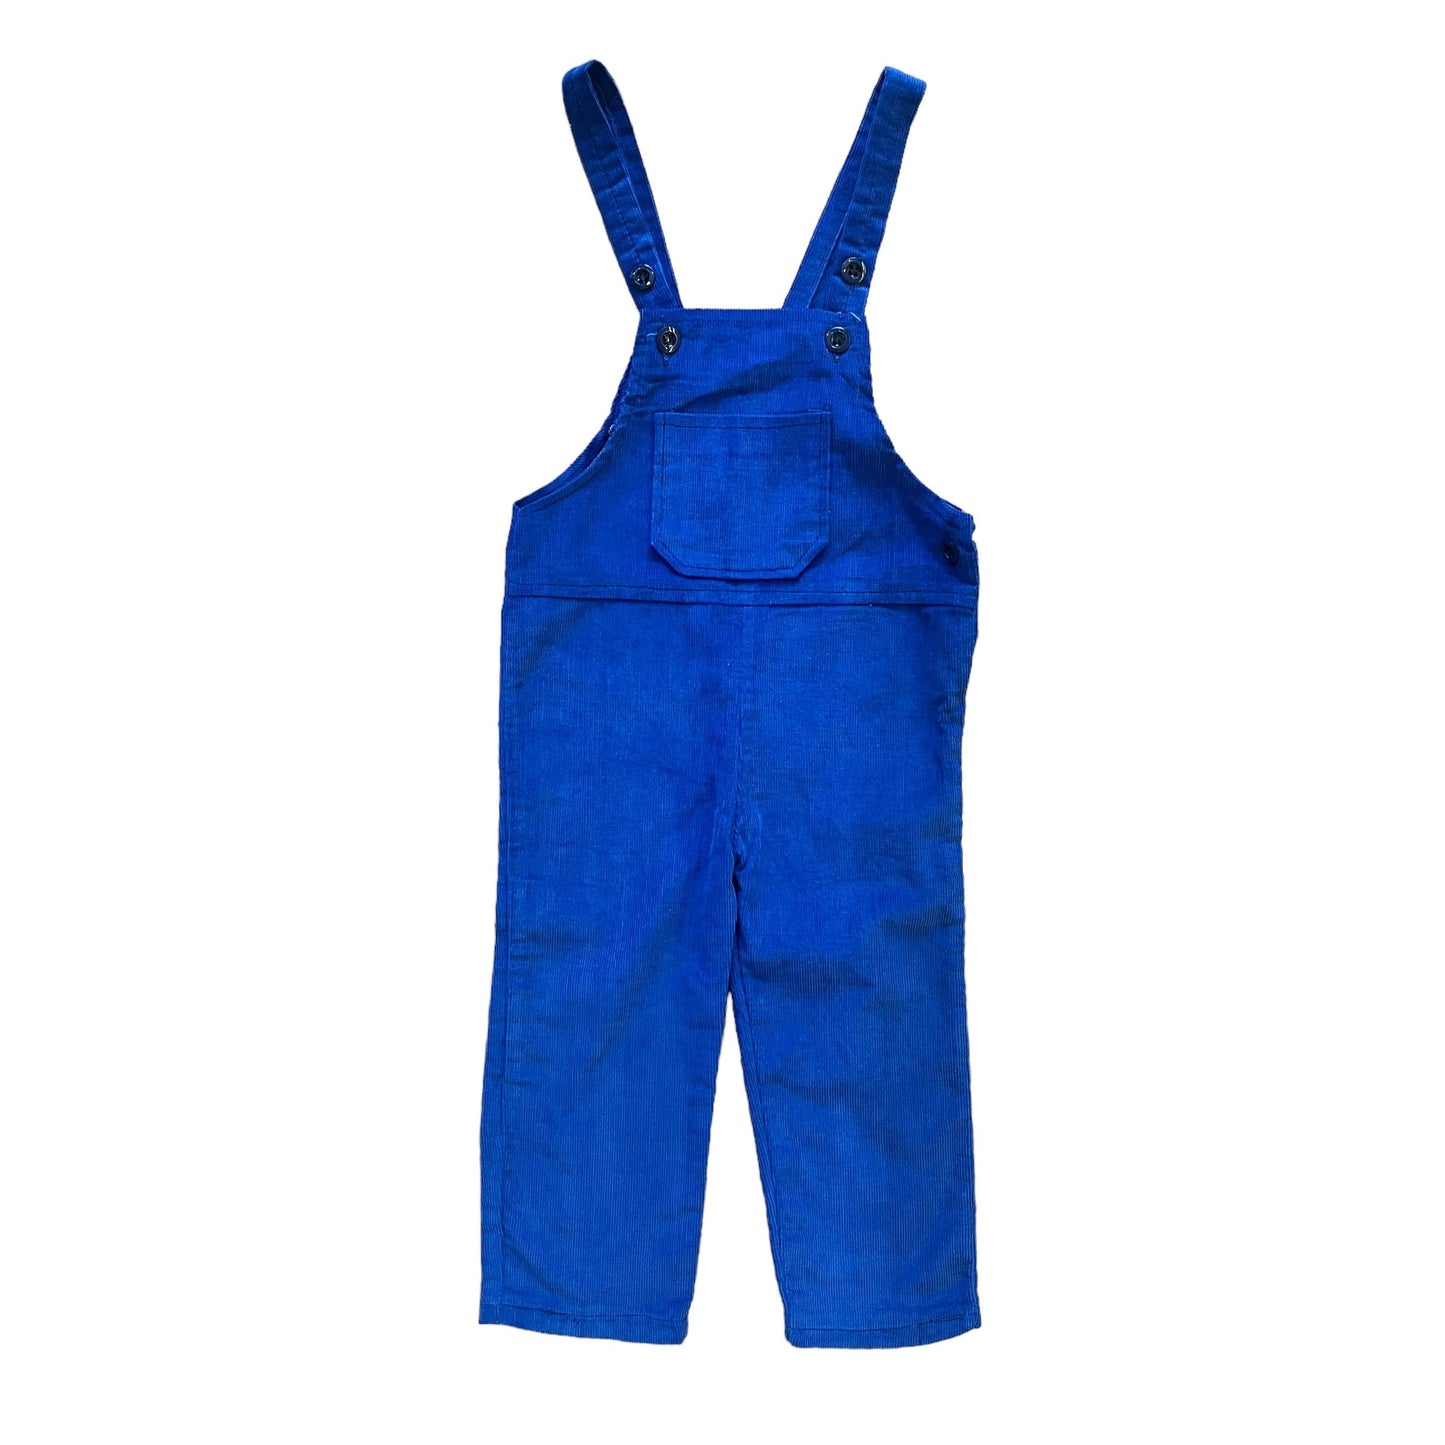 Vintage 1960s Blue Cord Dungarees 9-12 Months